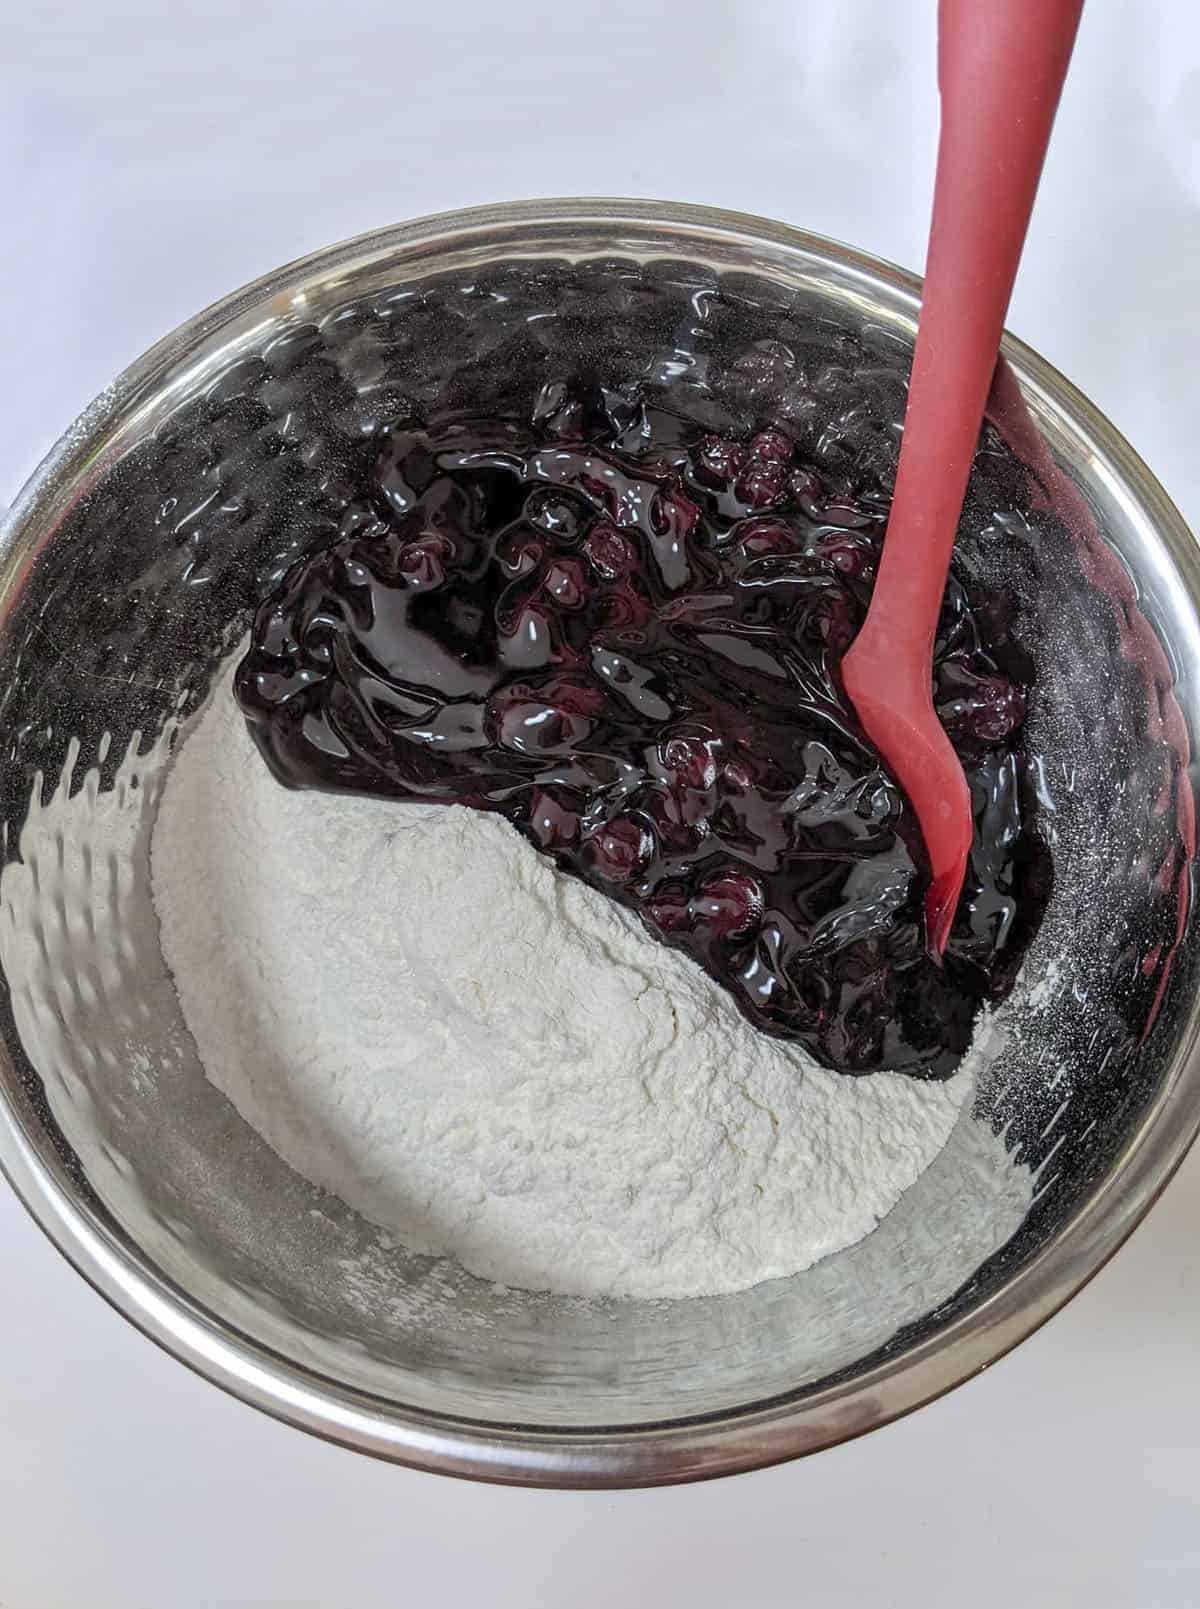 Blueberry pie filling and cake mix sitting in a bowl with a red spatula on the right.